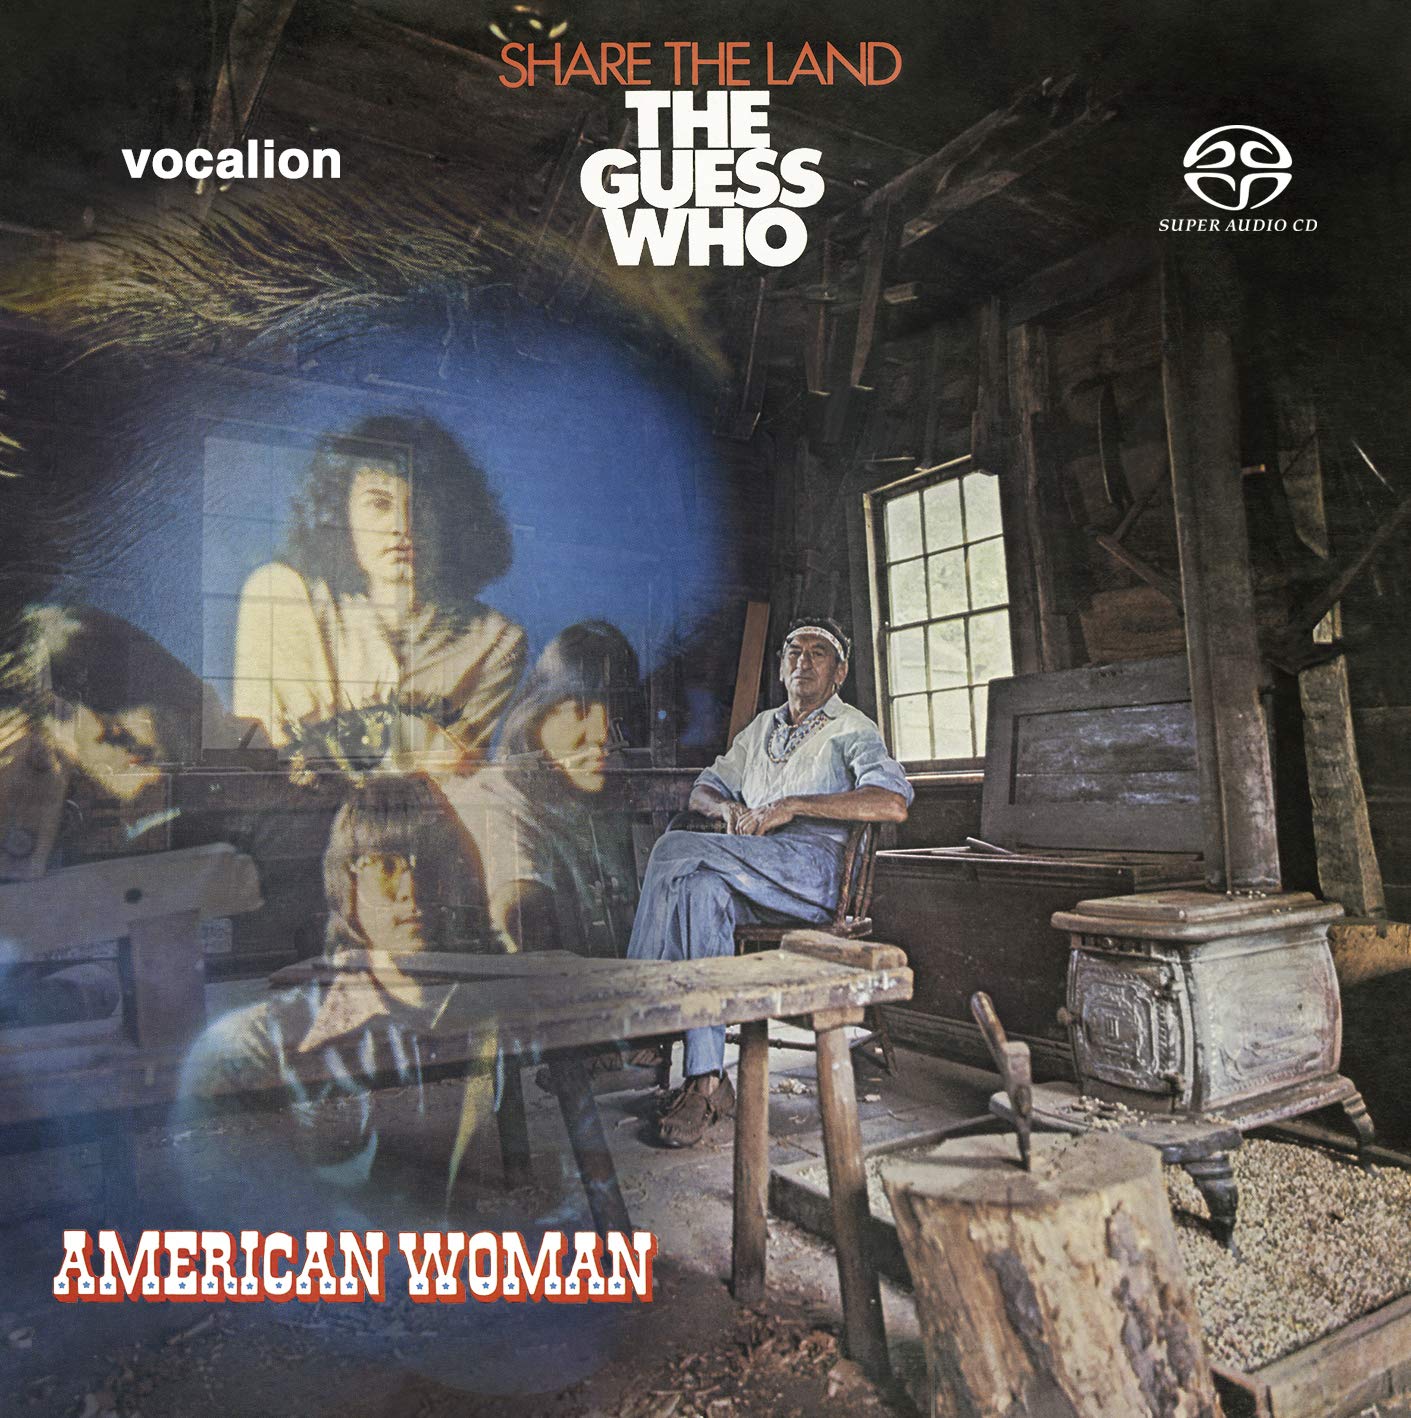 The Guess Who - American Woman & Share The Land (1970) [Reissue 2019] MCH SACD ISO + FLAC 24bit/96kHz